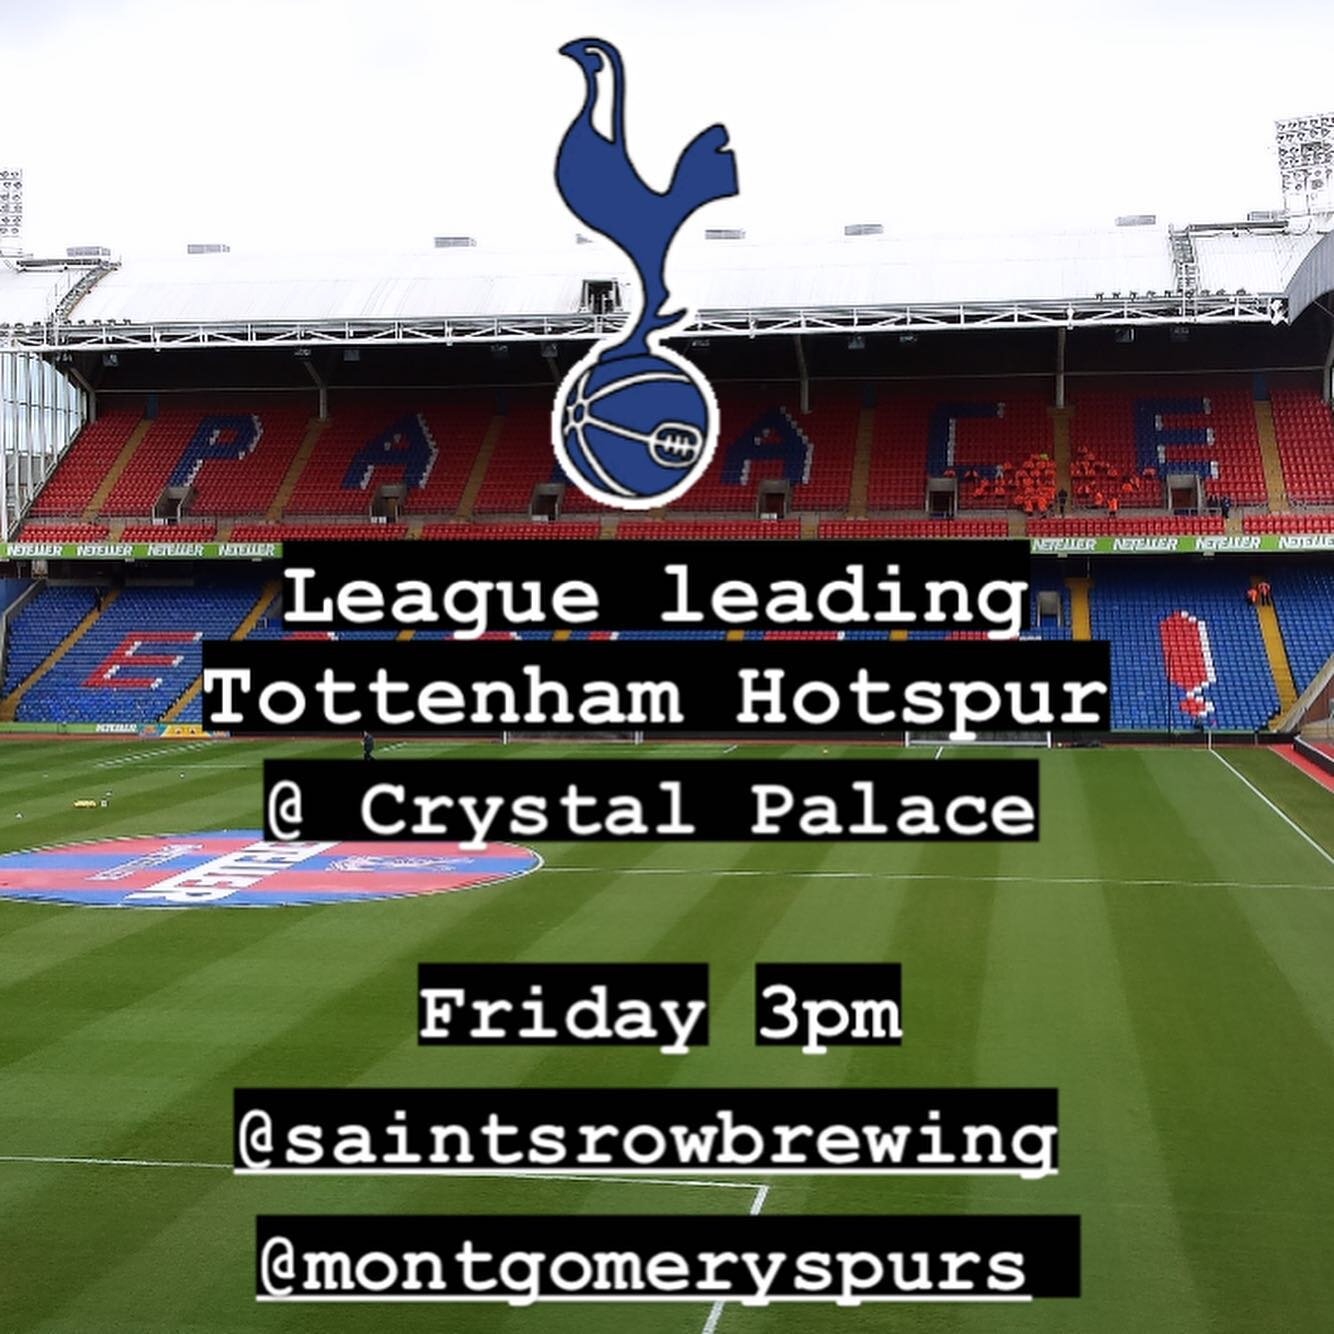 🎶 Oh When the Spurs Go Marching In 🎶 

Dream start to the season for the Tottenham Hotspur. Come catch the Palace game @saintsrowbrewing this Friday at 3pm! 

Also showing the Manchester Derby this Sunday at 11:30am. Come out and have some fun with